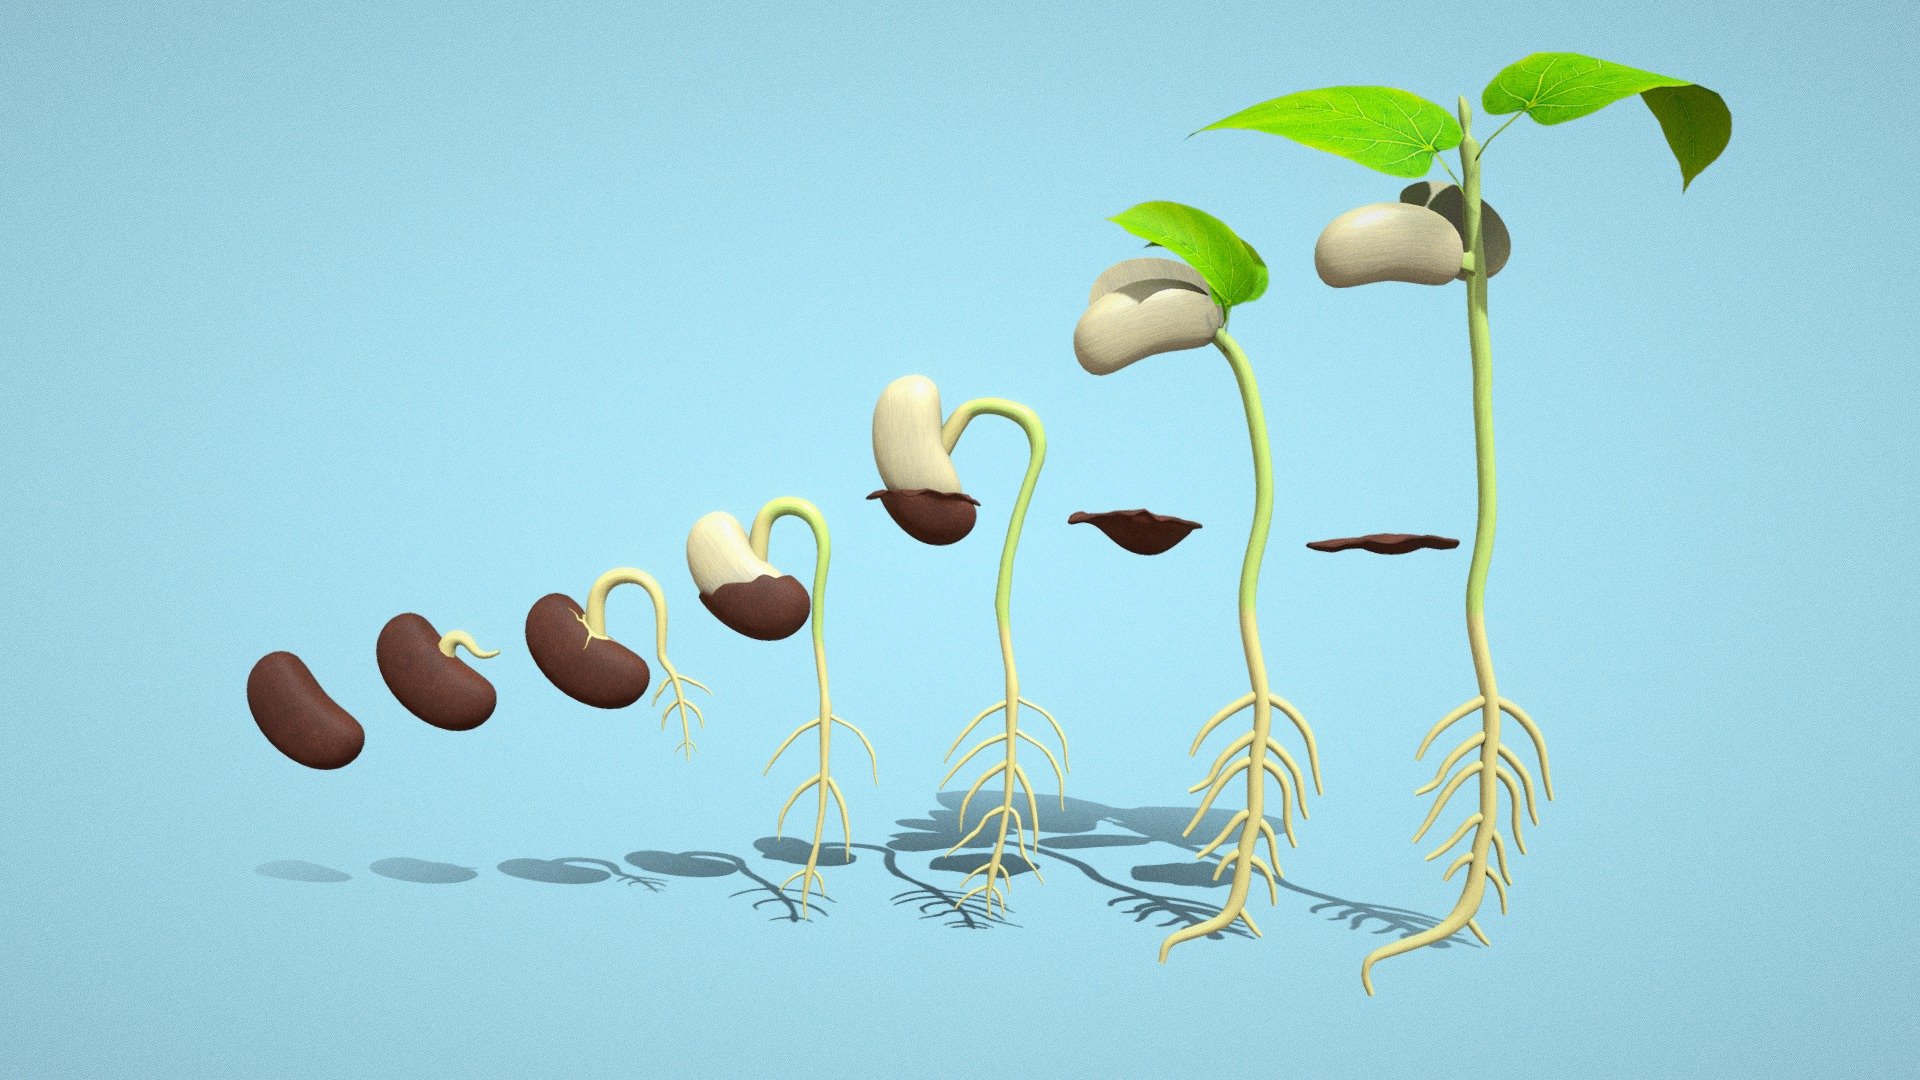 What is Seed Germination? Seed germination may be defined as the fundamental process by which different plant species grow from a single seed into a plant. This process influences both crop yield and quality. A common example of seed germination is the sprouting of a seedling from a seed of an angiosperm or gymnosperm 3d model